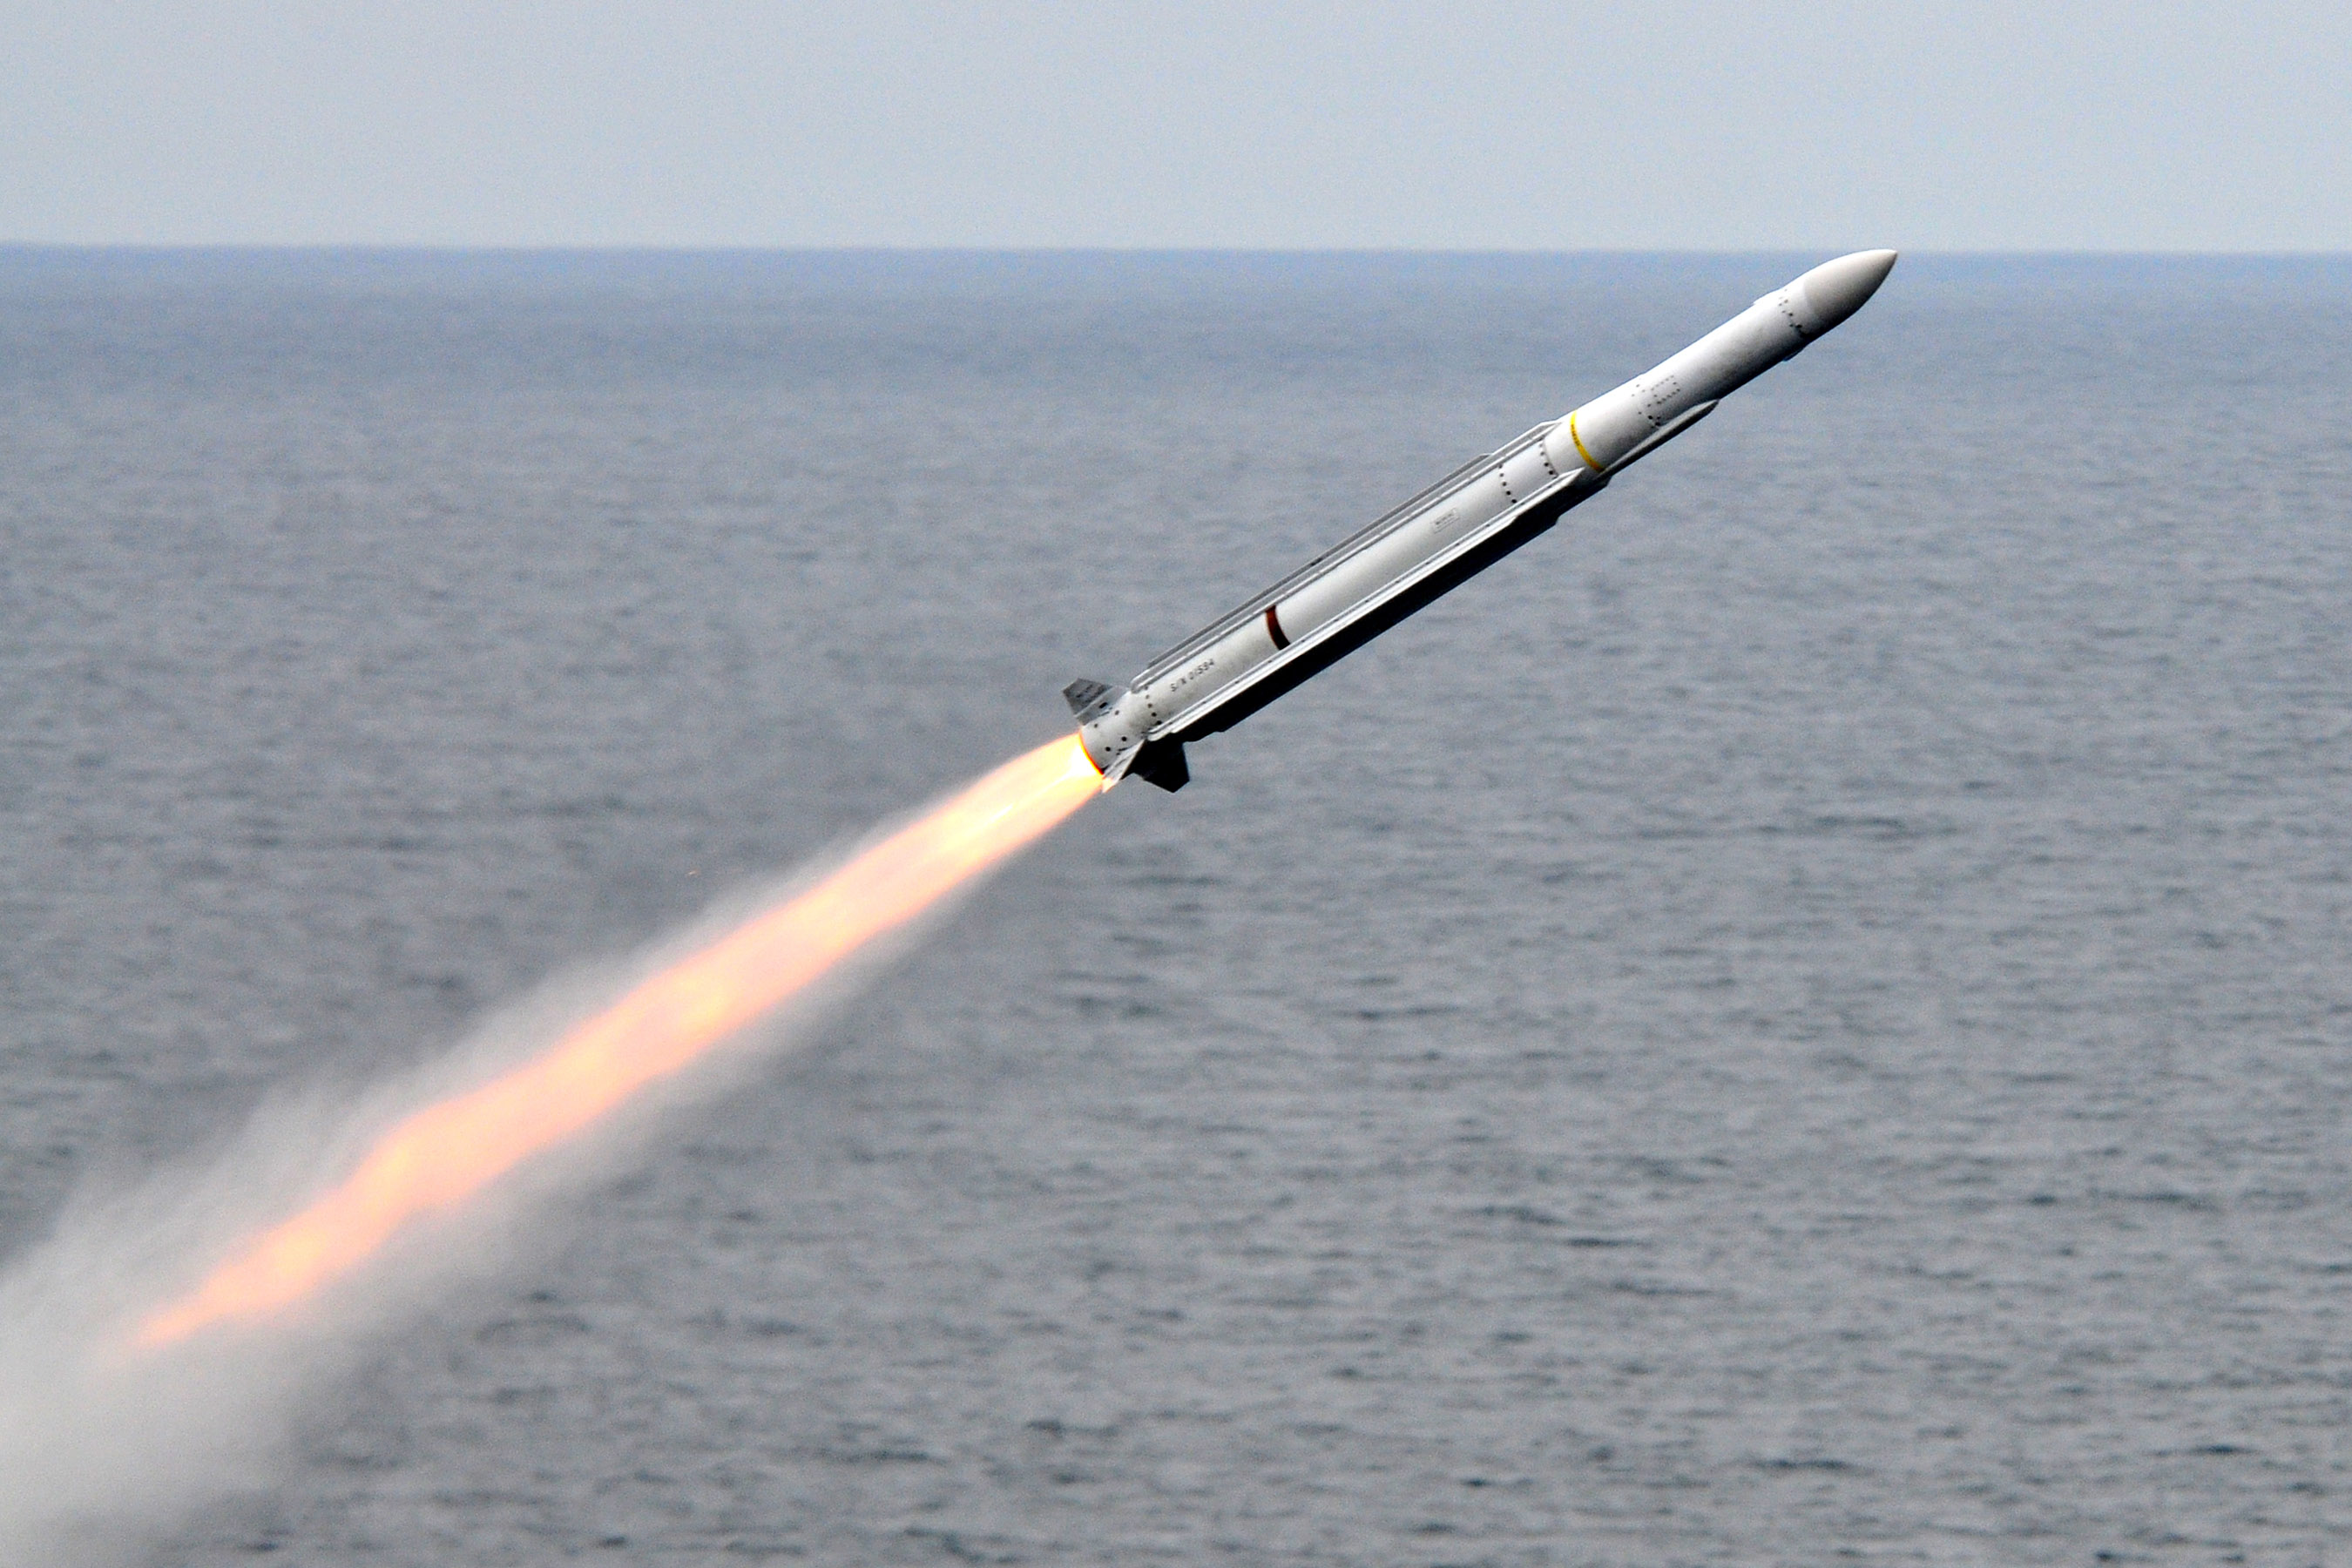 Image: Russia deploys warship with hypersonic missiles to waters around Ukraine